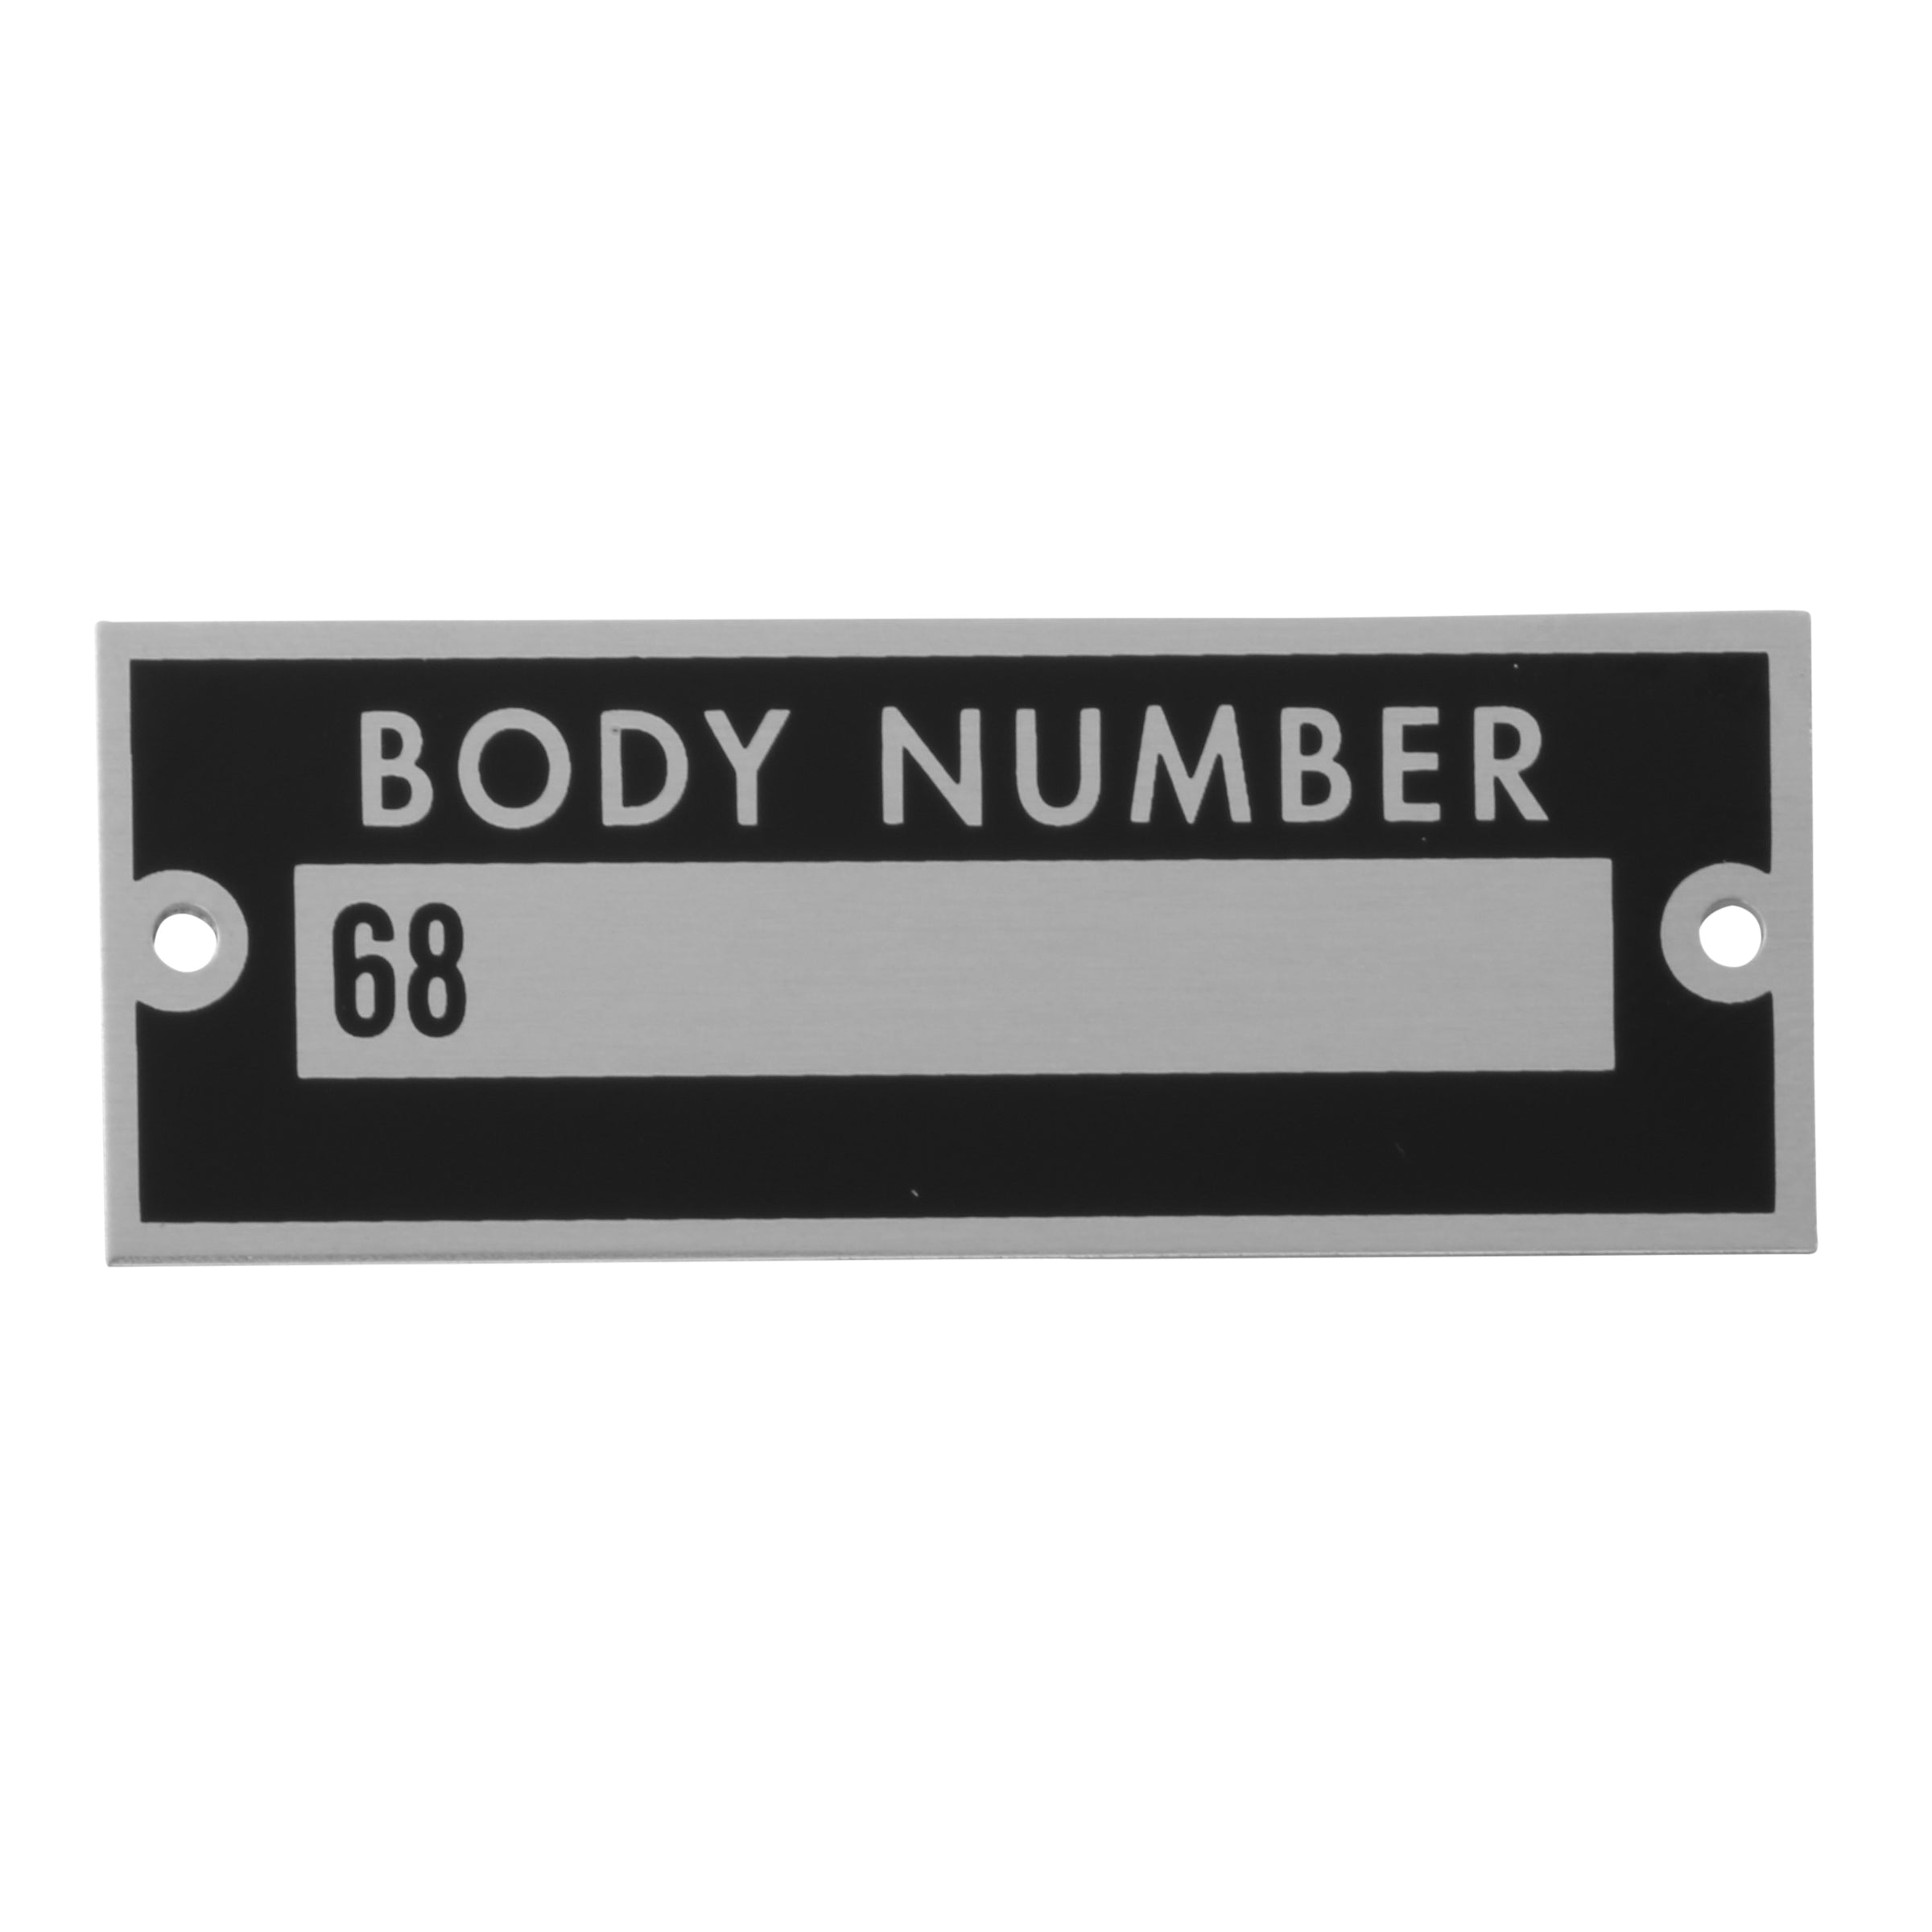 Body Number Plate • 1936 Ford Passenger